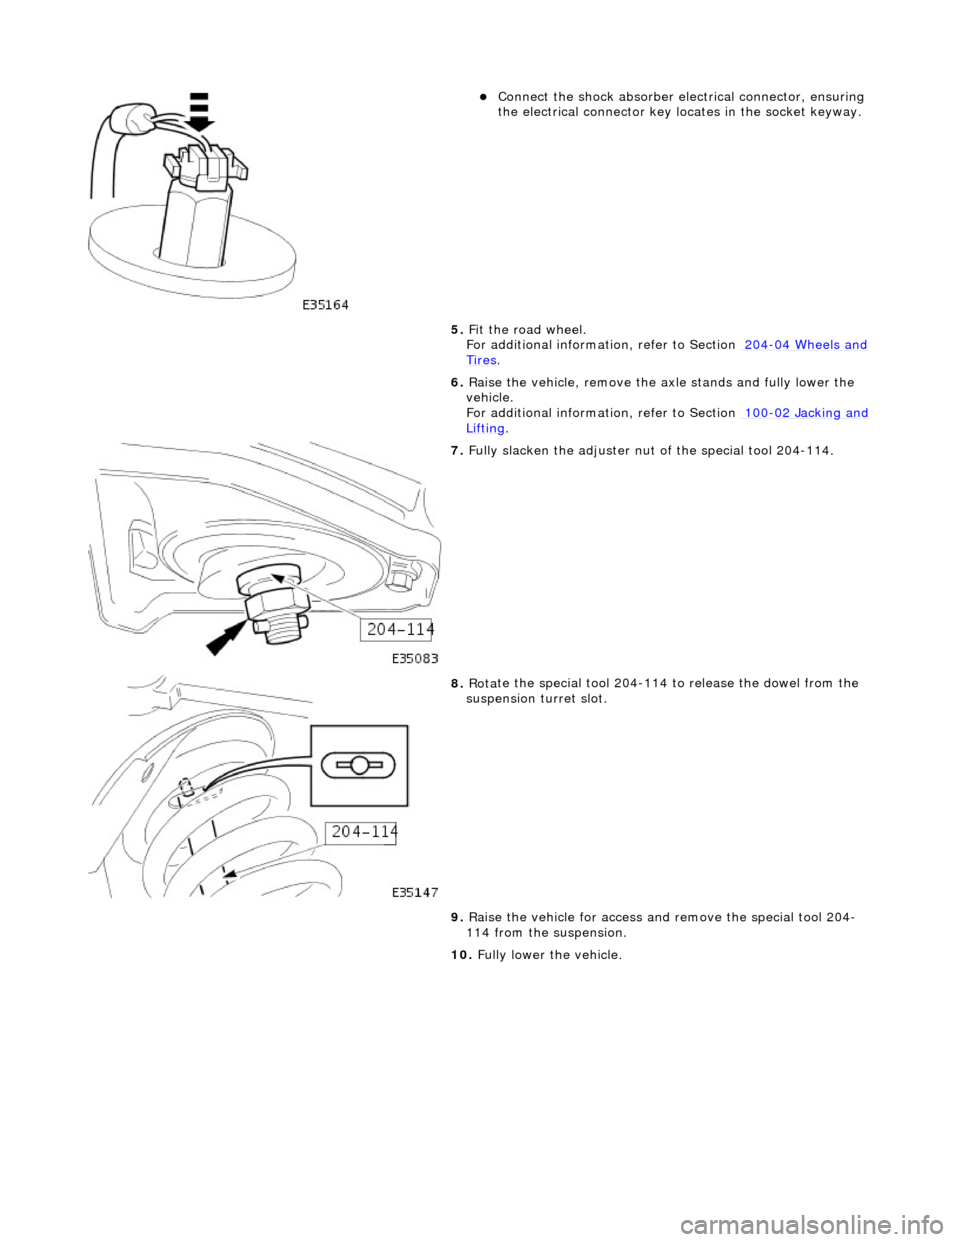 JAGUAR X308 1998 2.G Workshop Manual  
  
Connect
  the shock absorber elec
trical connector, ensuring 
the electrical connector key locates in the socket keyway.  
5.  Fit the road wheel.  
For additional informat ion, refer to Secti